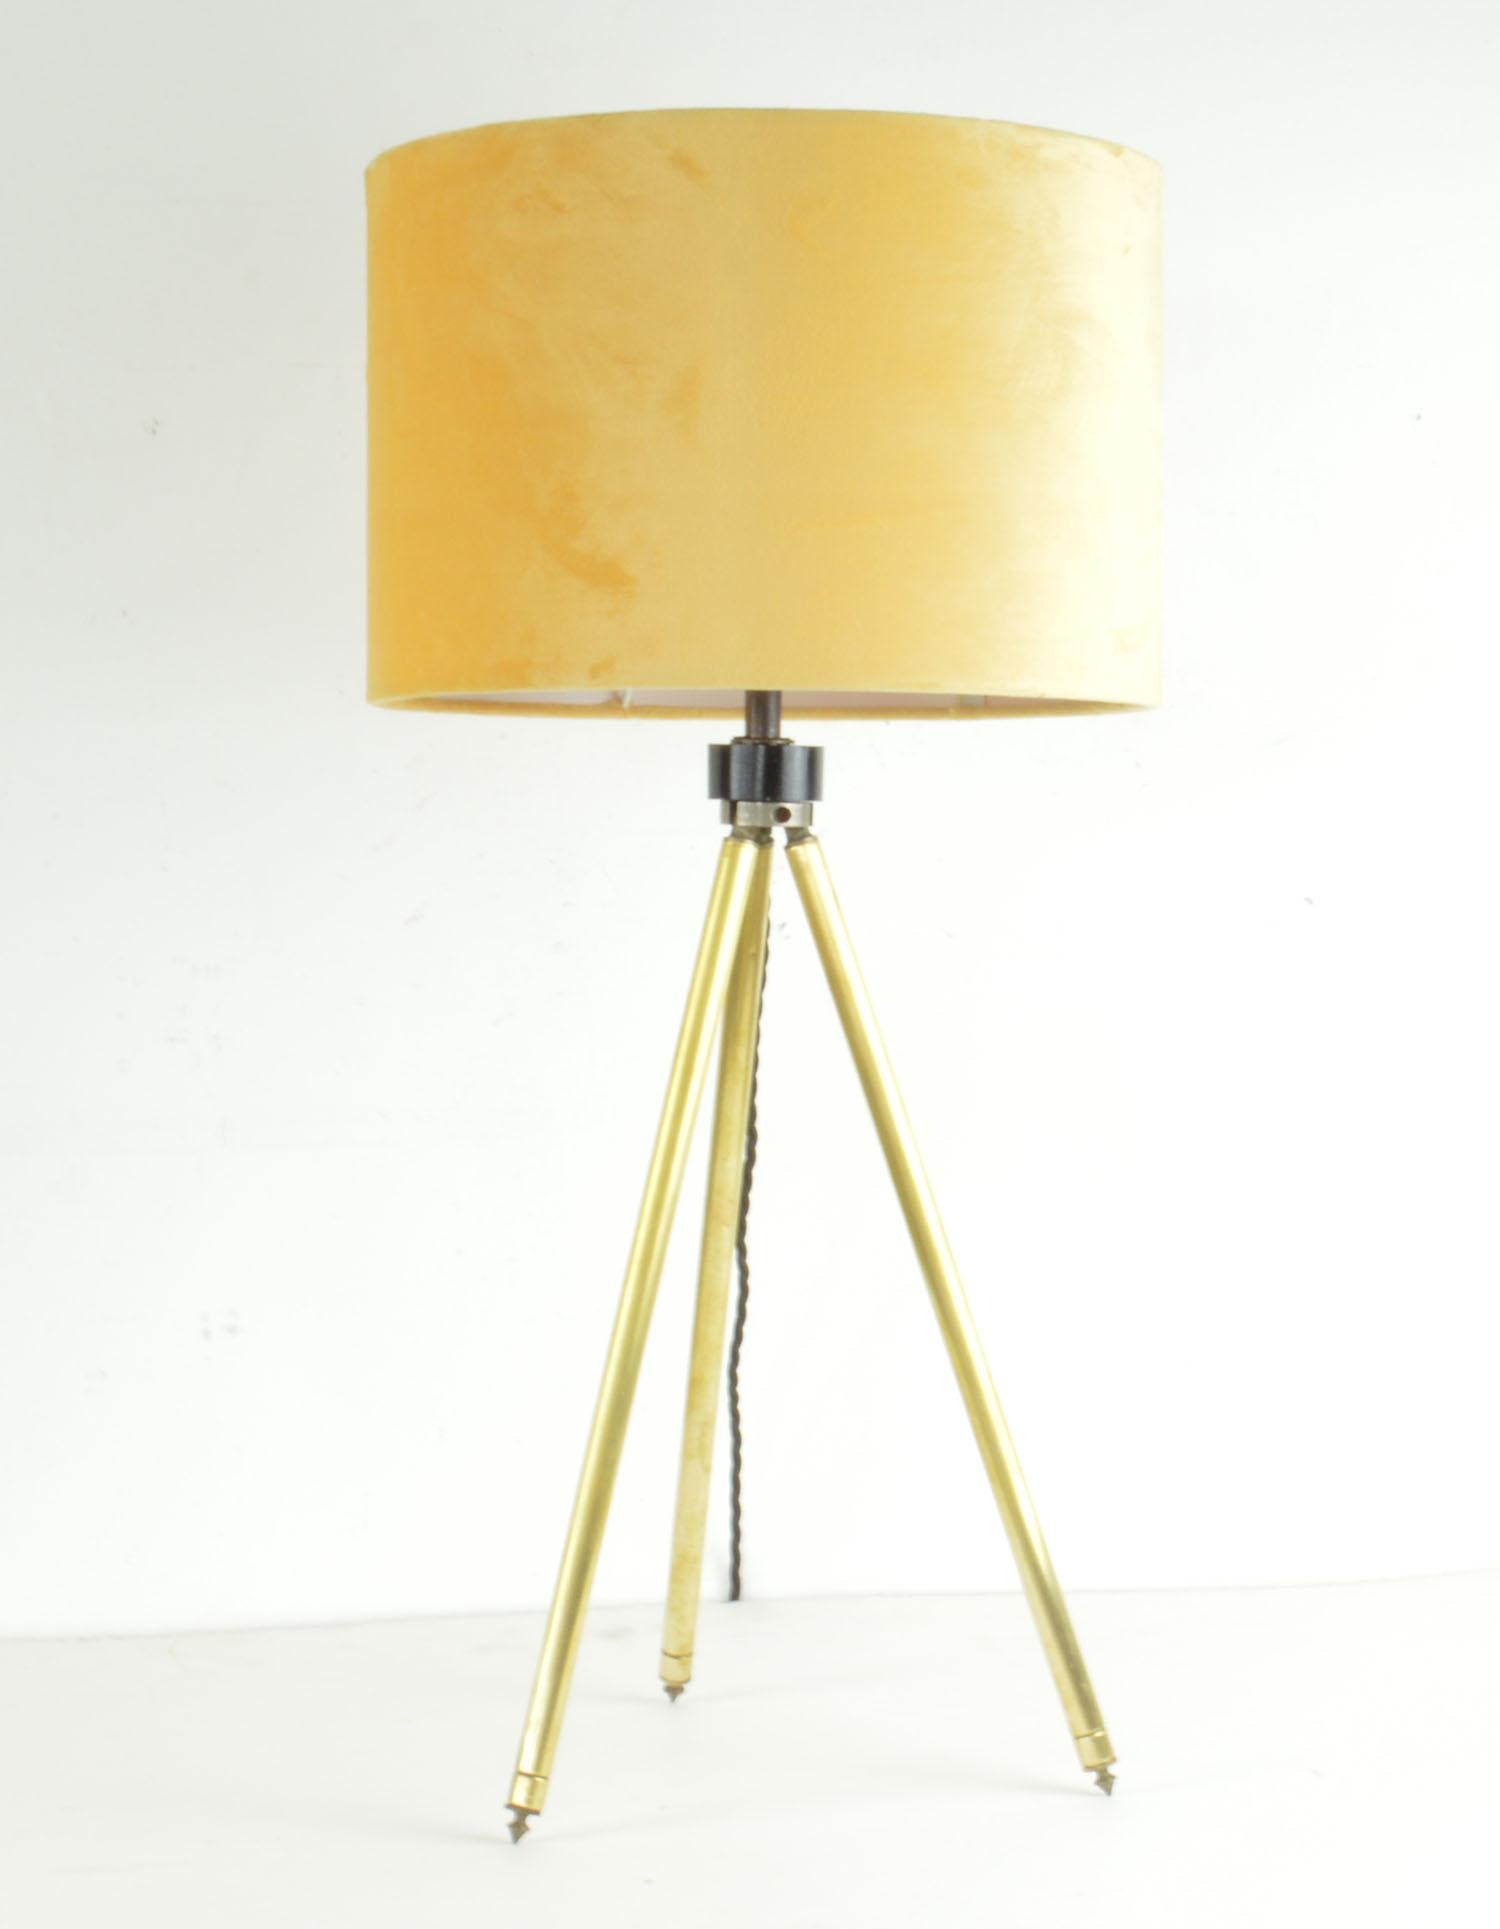 Super brushed brass tripod table lamp.

Yellow velvet shade

Telescopic so the height can be adjusted. The measurement given below relates to the position in the image.

Converted from a vintage camera tripod.

Re-wired to UK